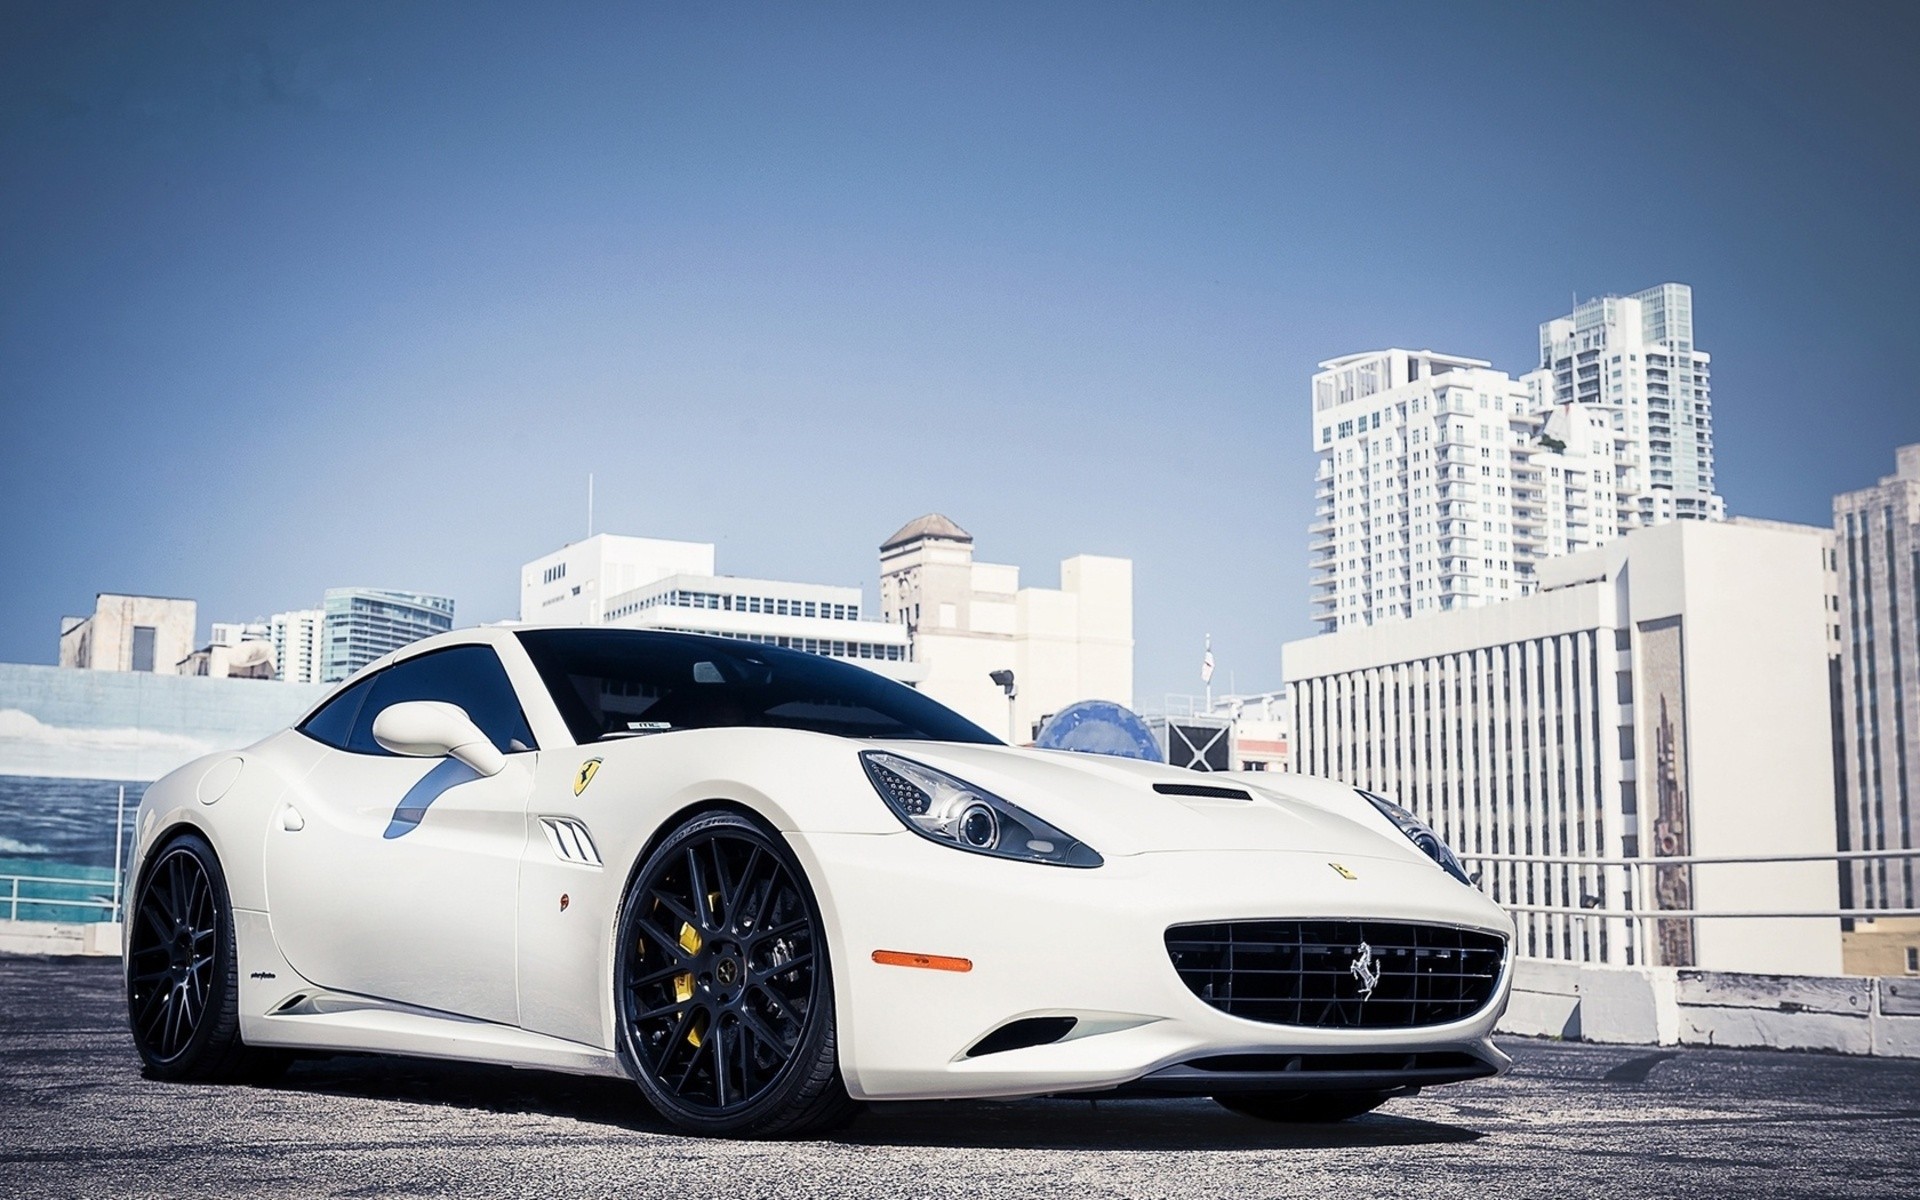 White sports car wallpapers and images - wallpapers, pictures, photos